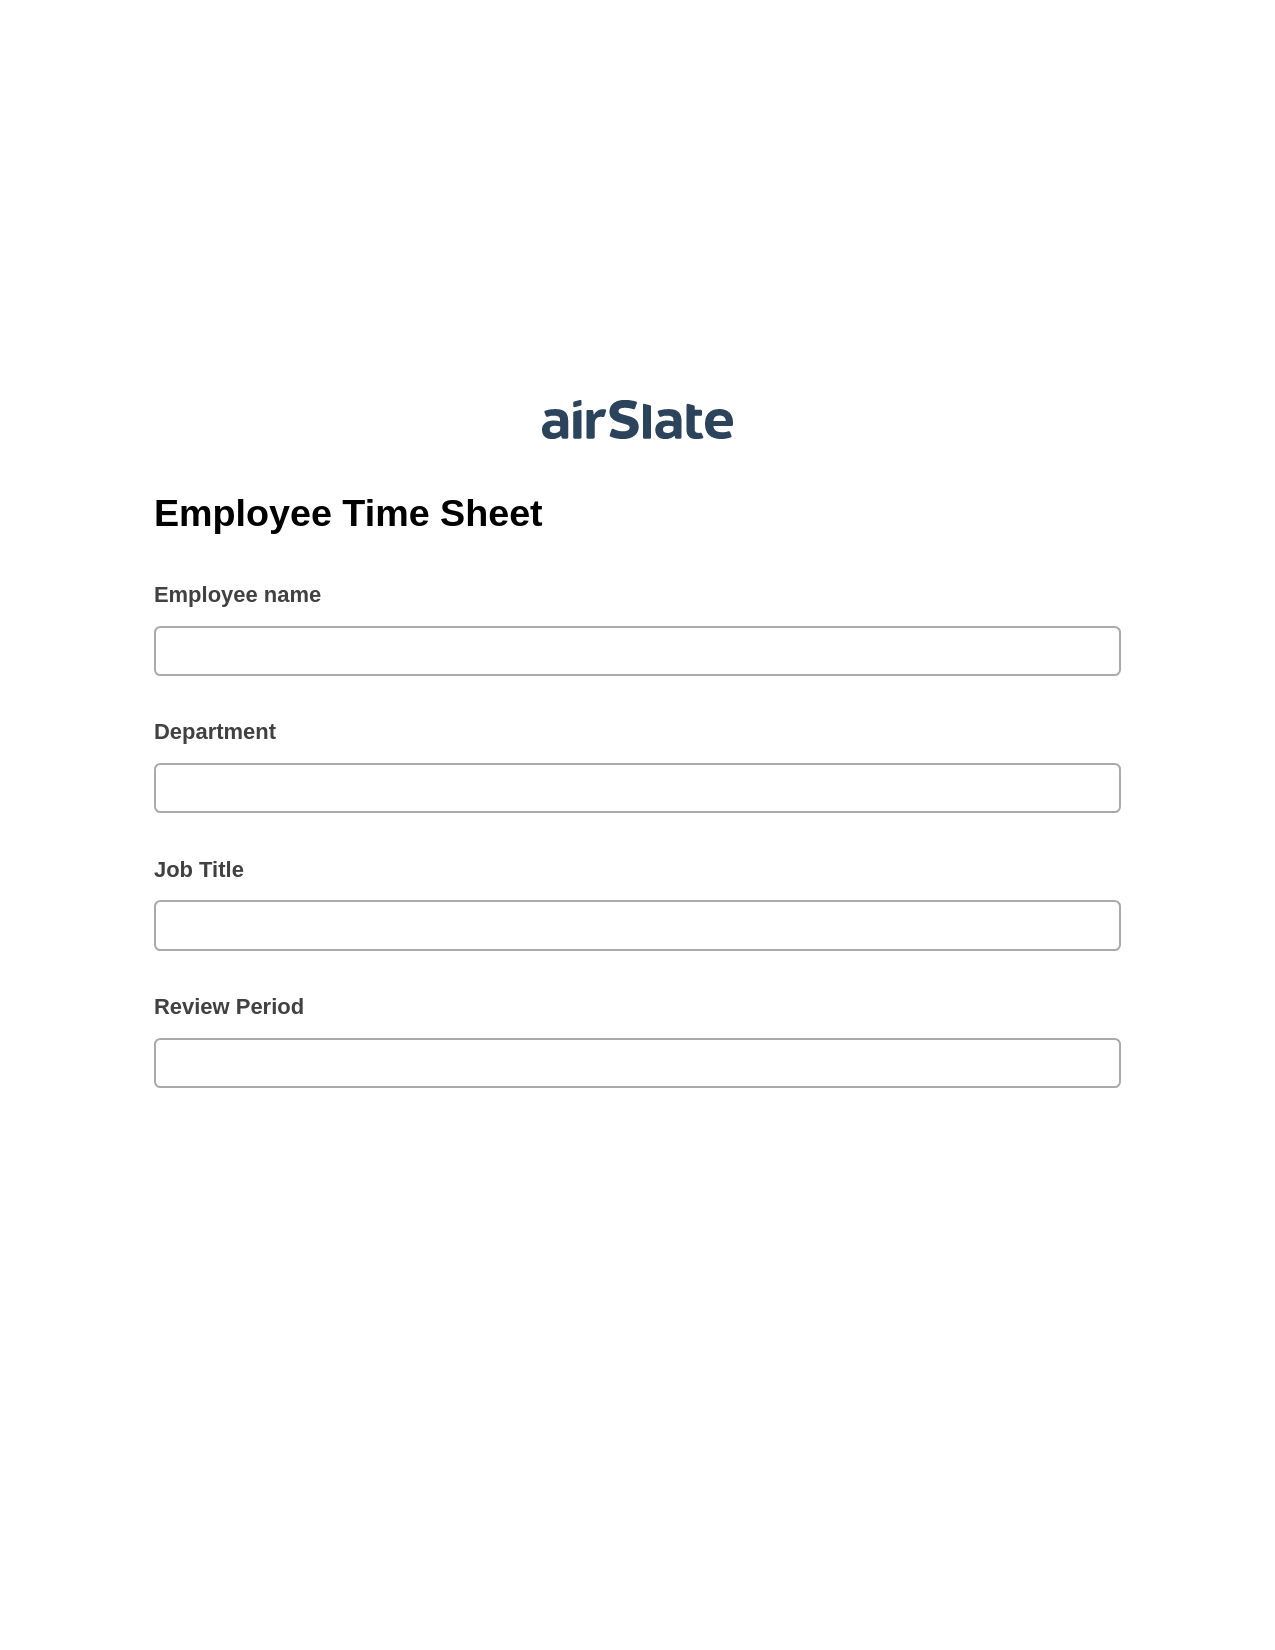 Multirole Employee Time Sheet Pre-fill from MS Dynamics 365 Records, Create Slate Reminder Bot, Export to MySQL Bot